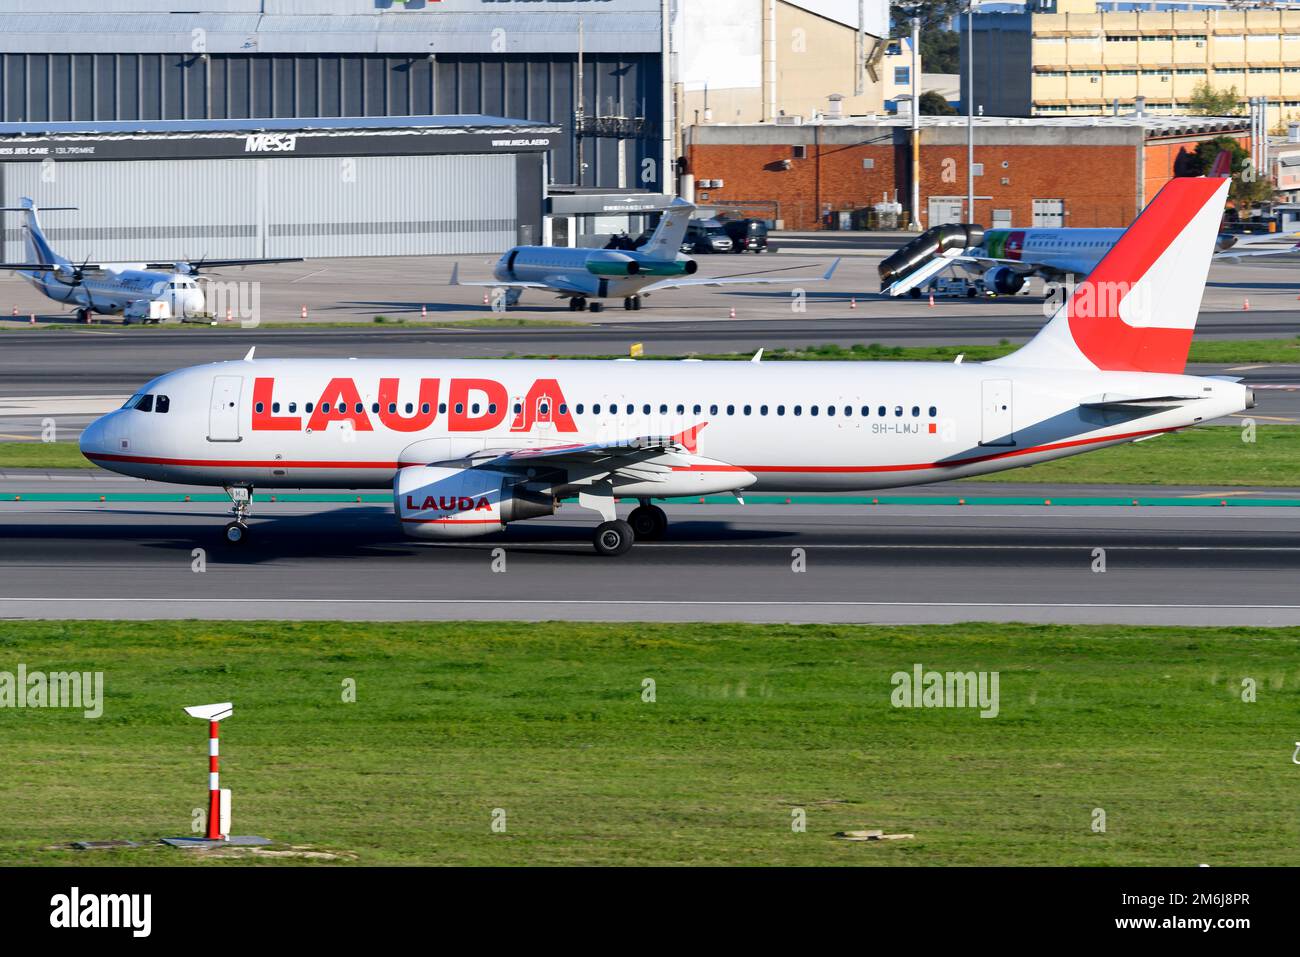 Lauda Europe Airbus A320 aircraft before departure Airplane of Lauda Airlines. Stock Photo